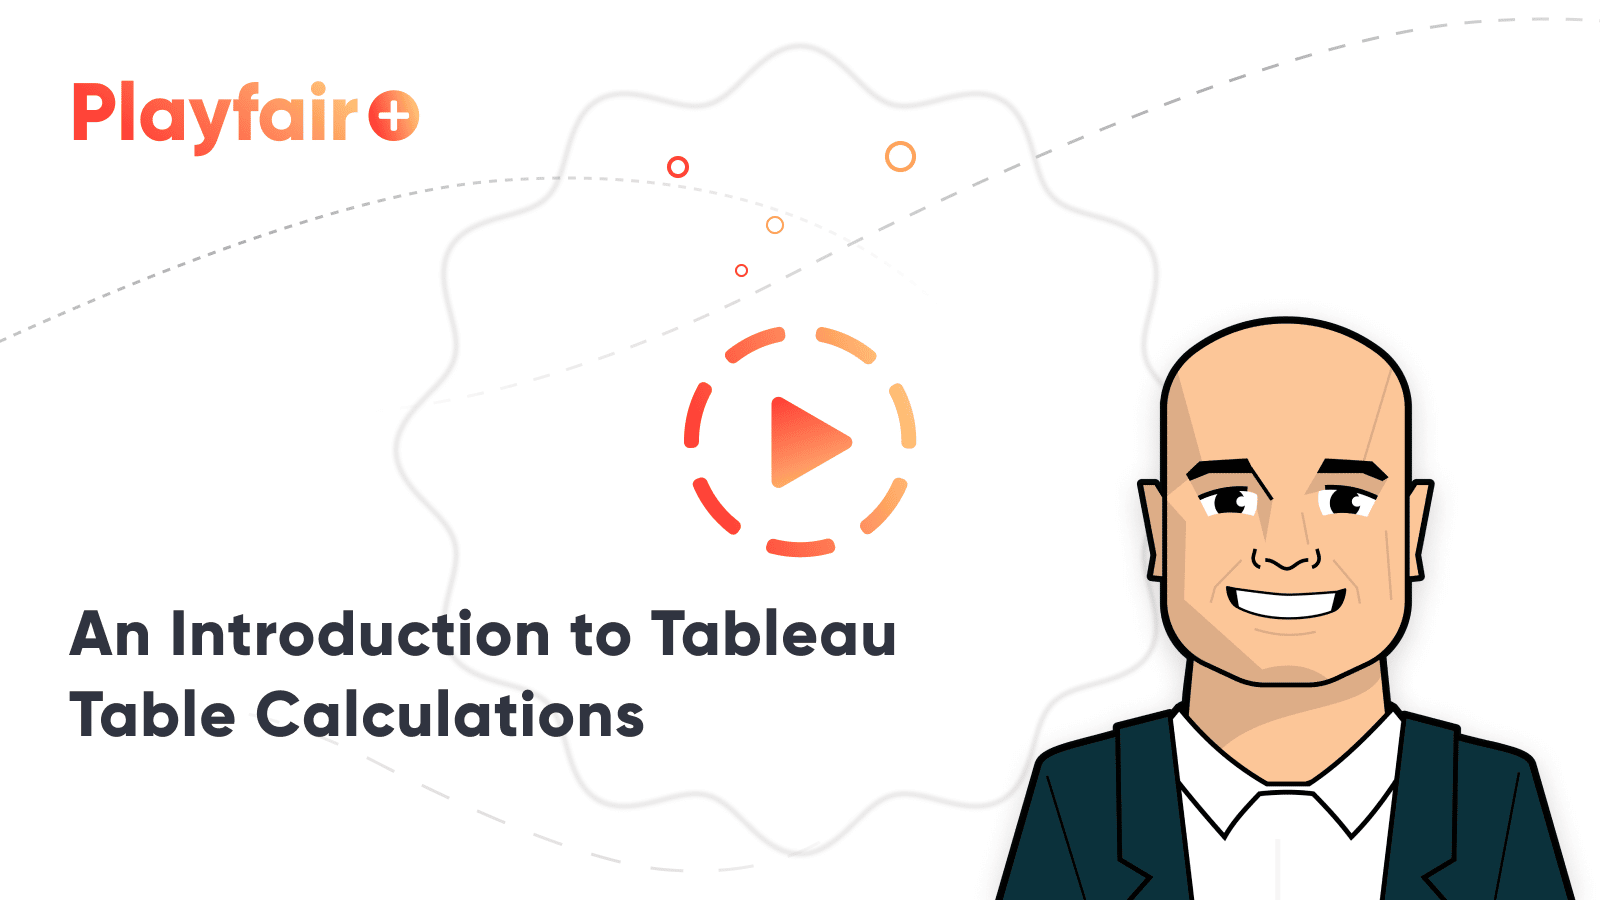 An Introduction to Tableau Table Calculations